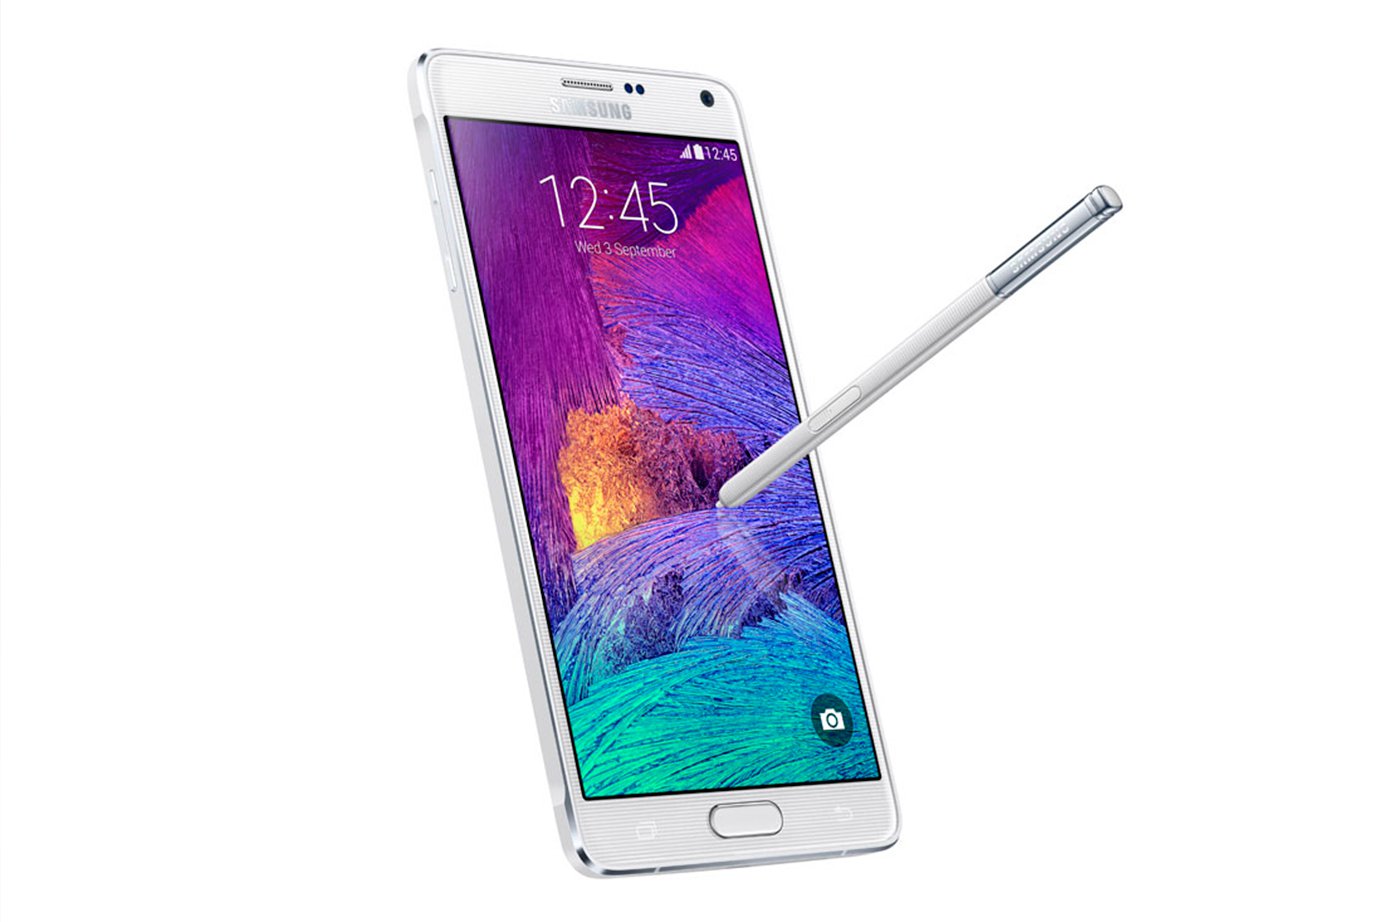 Sprint And T-Mobile Galaxy Note 4 Users Now Got CyanogenMod 12